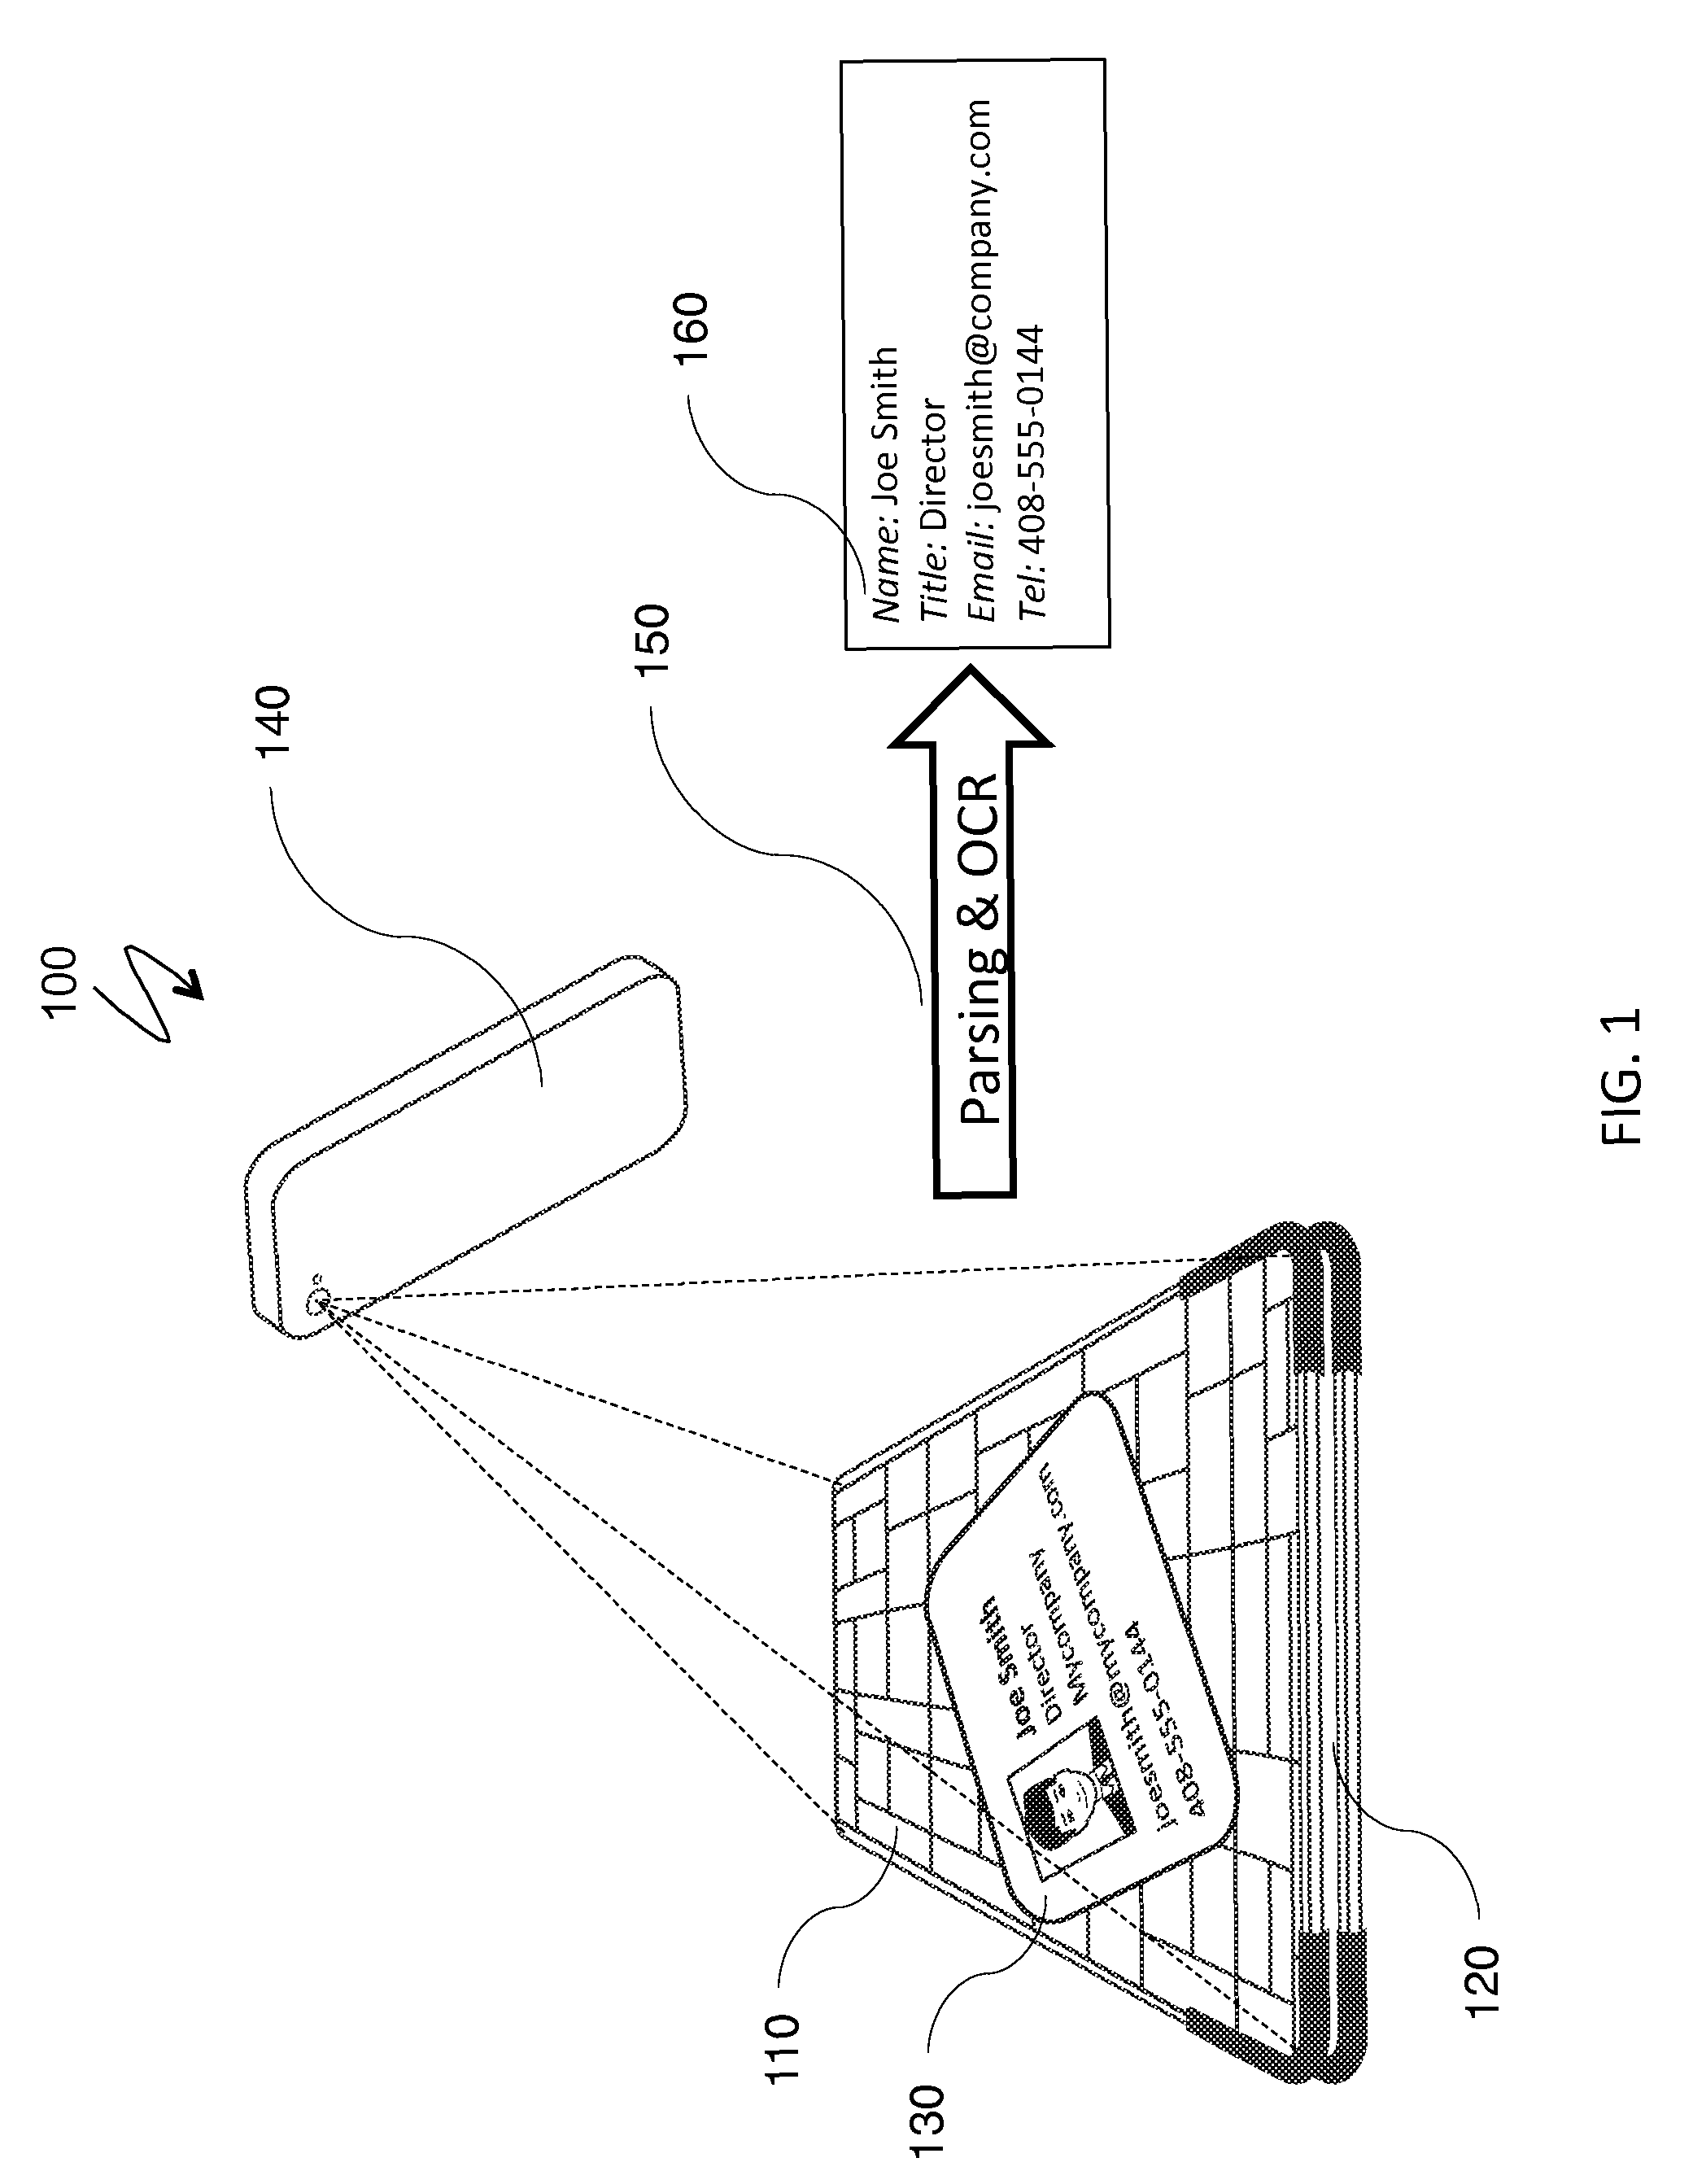 Using surfaces with printed patterns for image and data processing